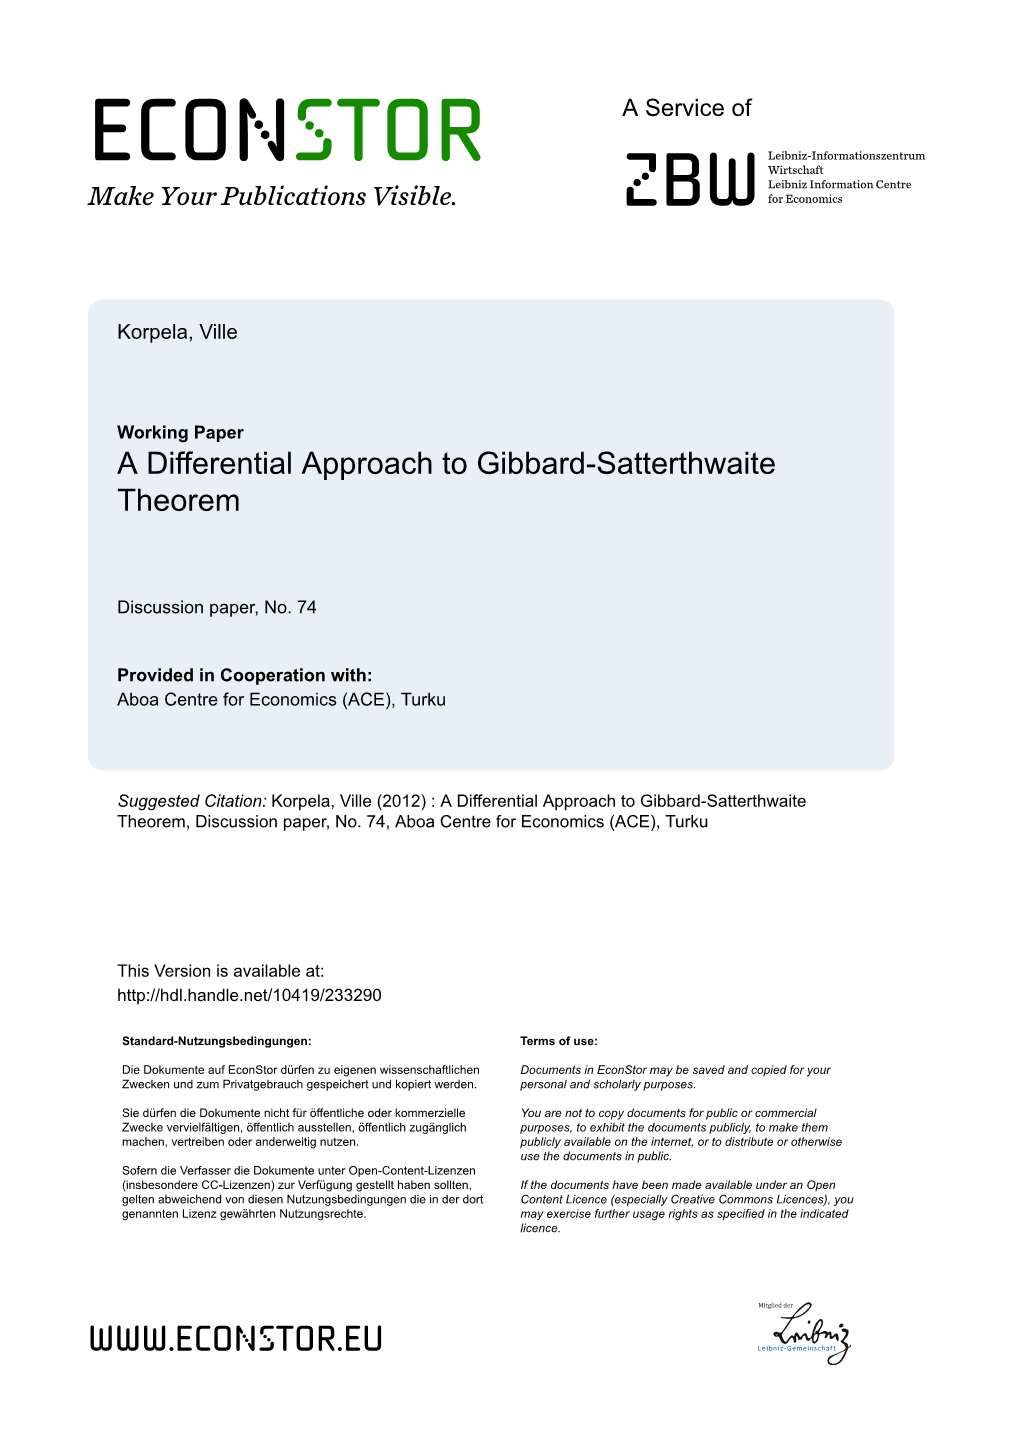 A Differential Approach to Gibbard-Satterthwaite Theorem